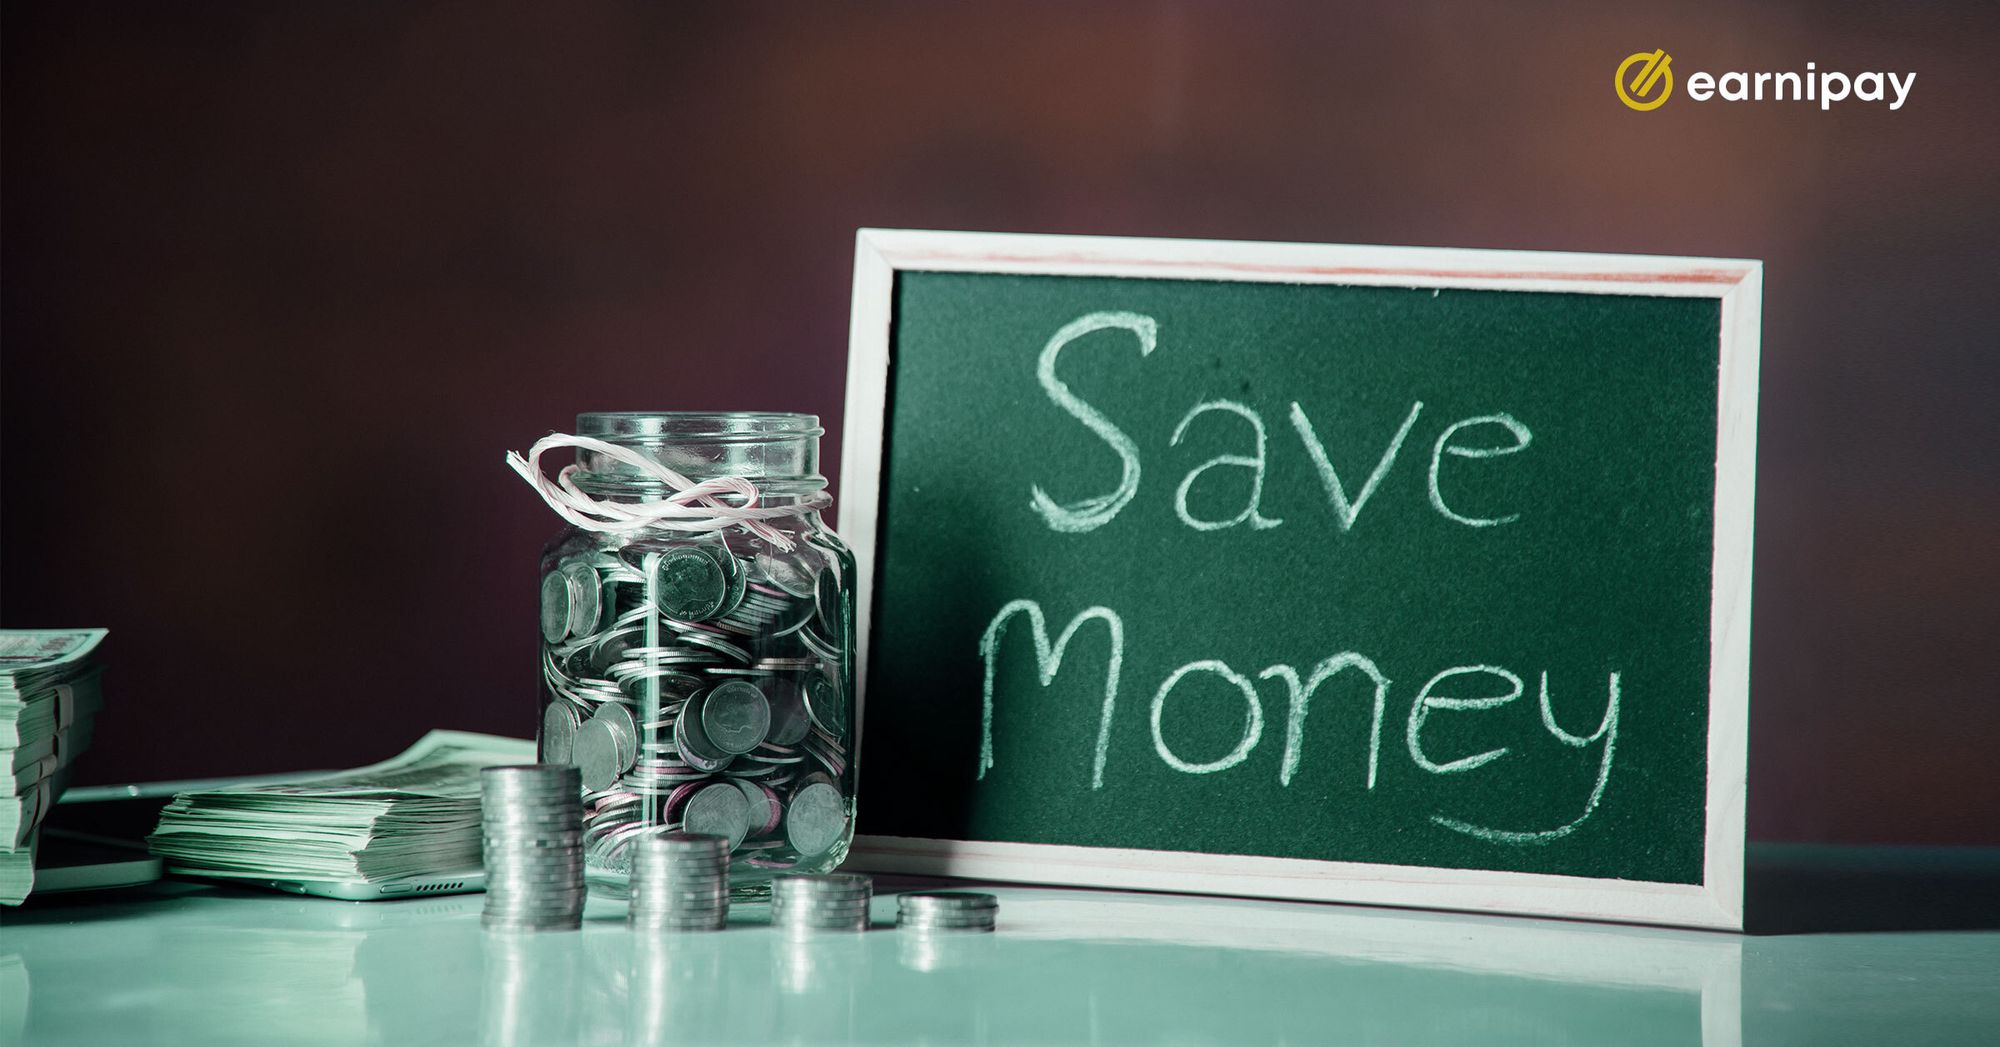 Savings: Your secret ingredient to better financial health